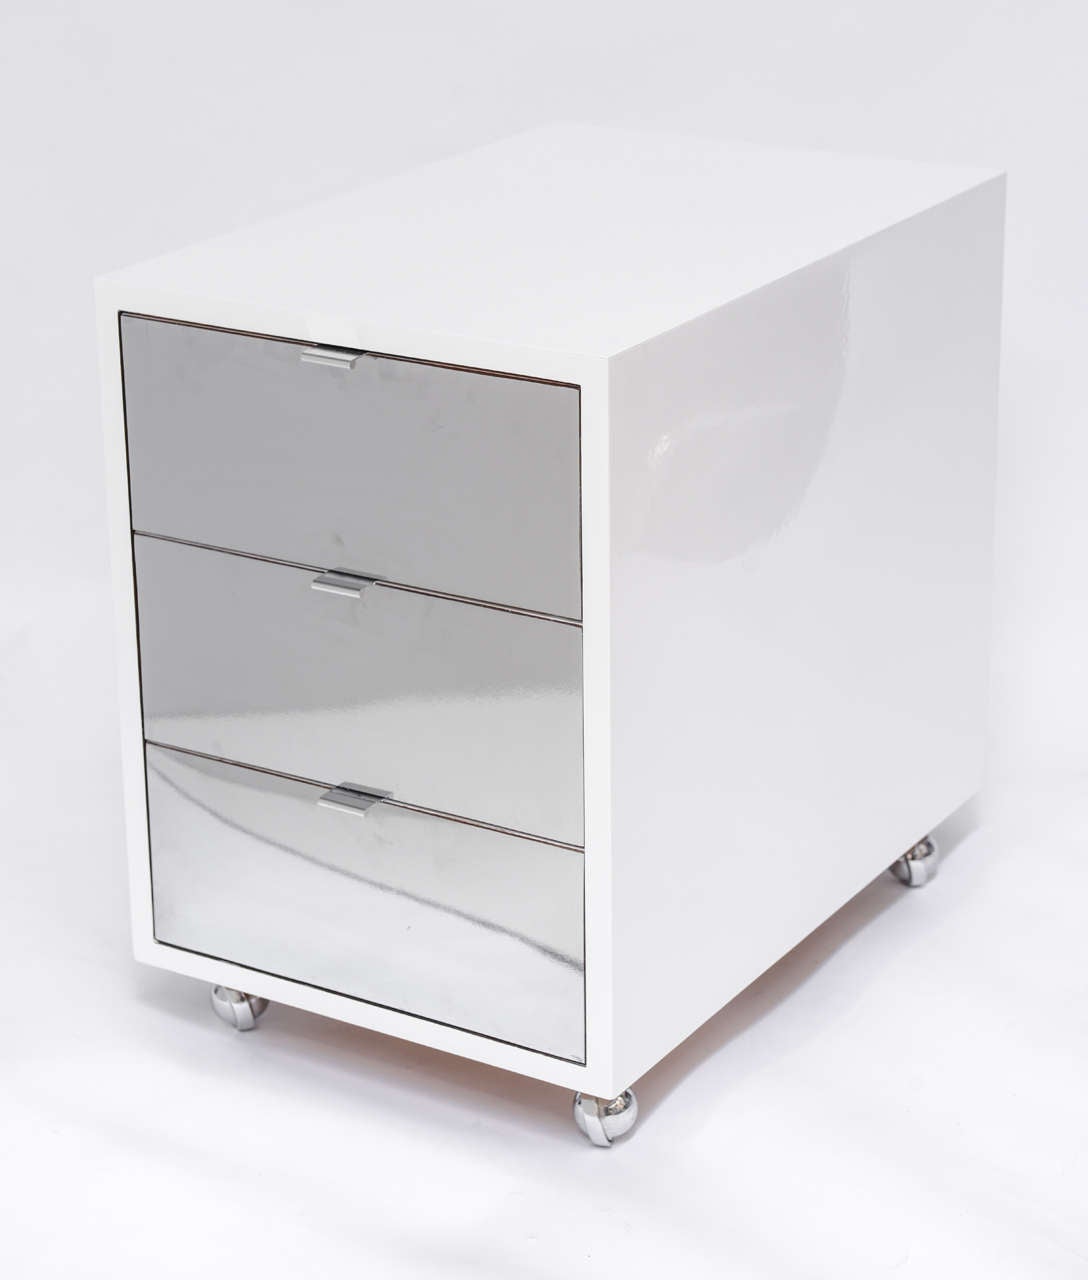 Late 20th Century 1970's Waterfall Desk White Laquered and Chrome Laminate